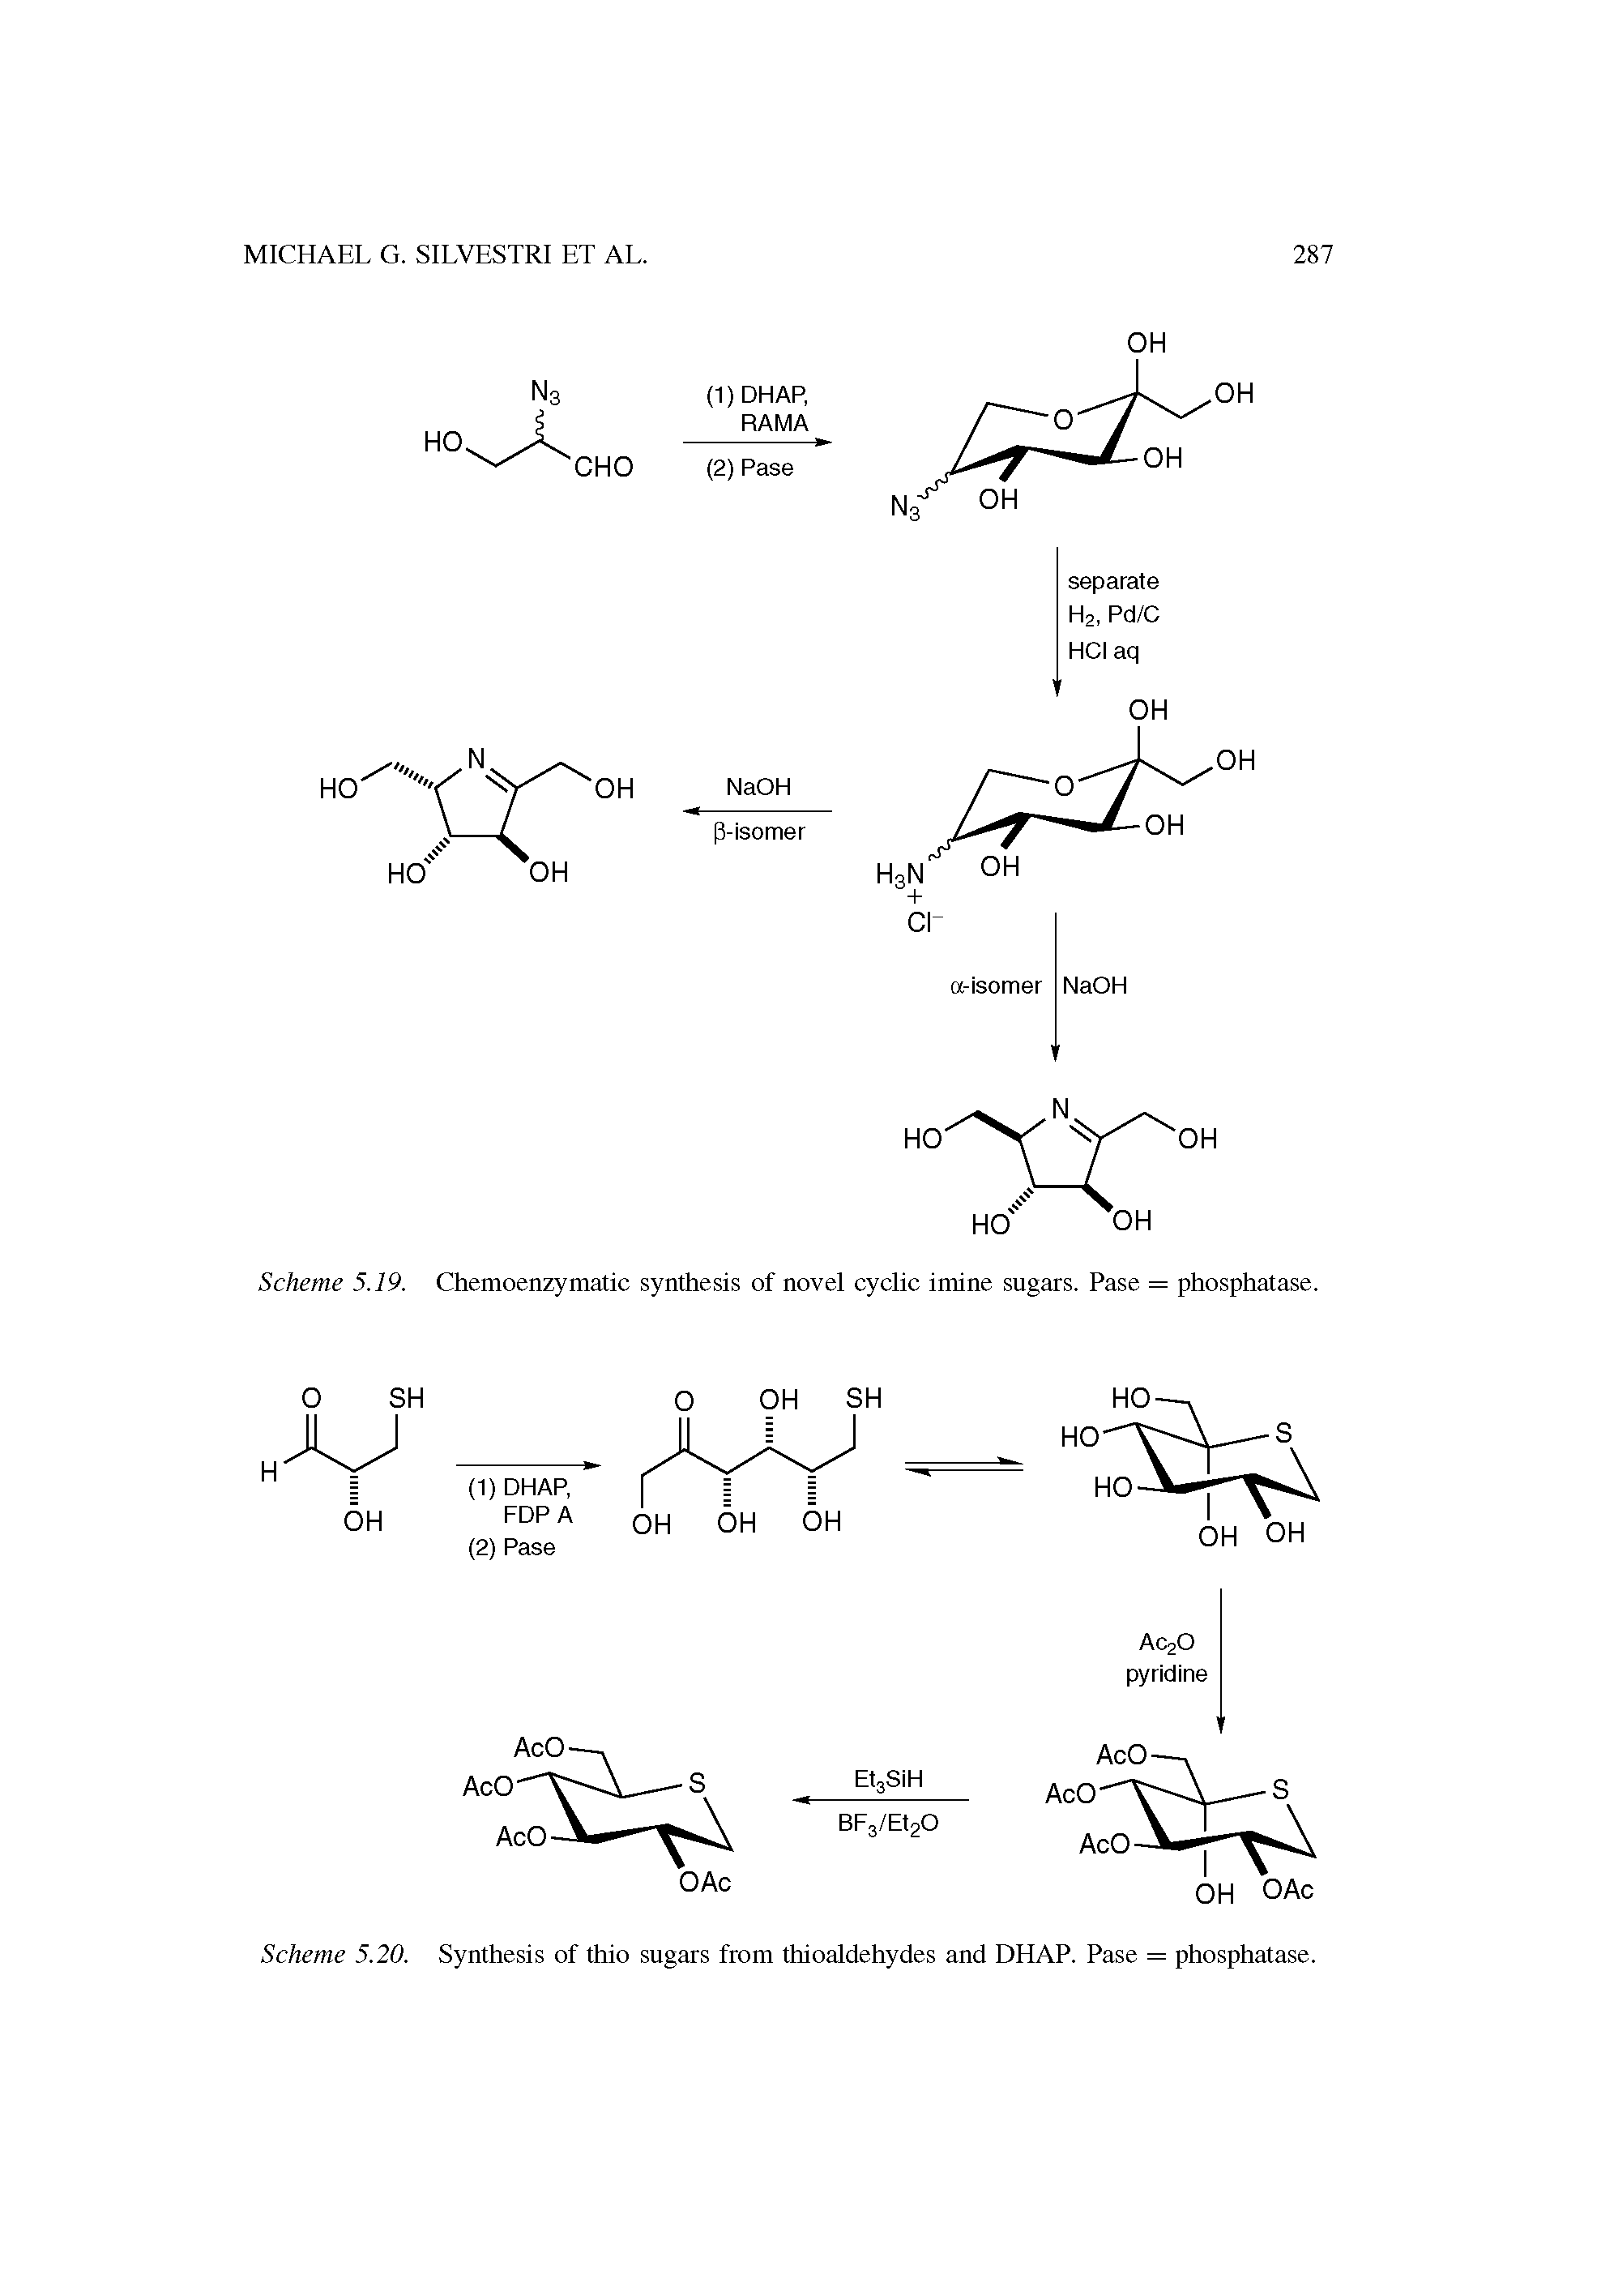 Scheme 5.20. Synthesis of thio sugars from thioaldehydes and DHAP. Pase = phosphatase.